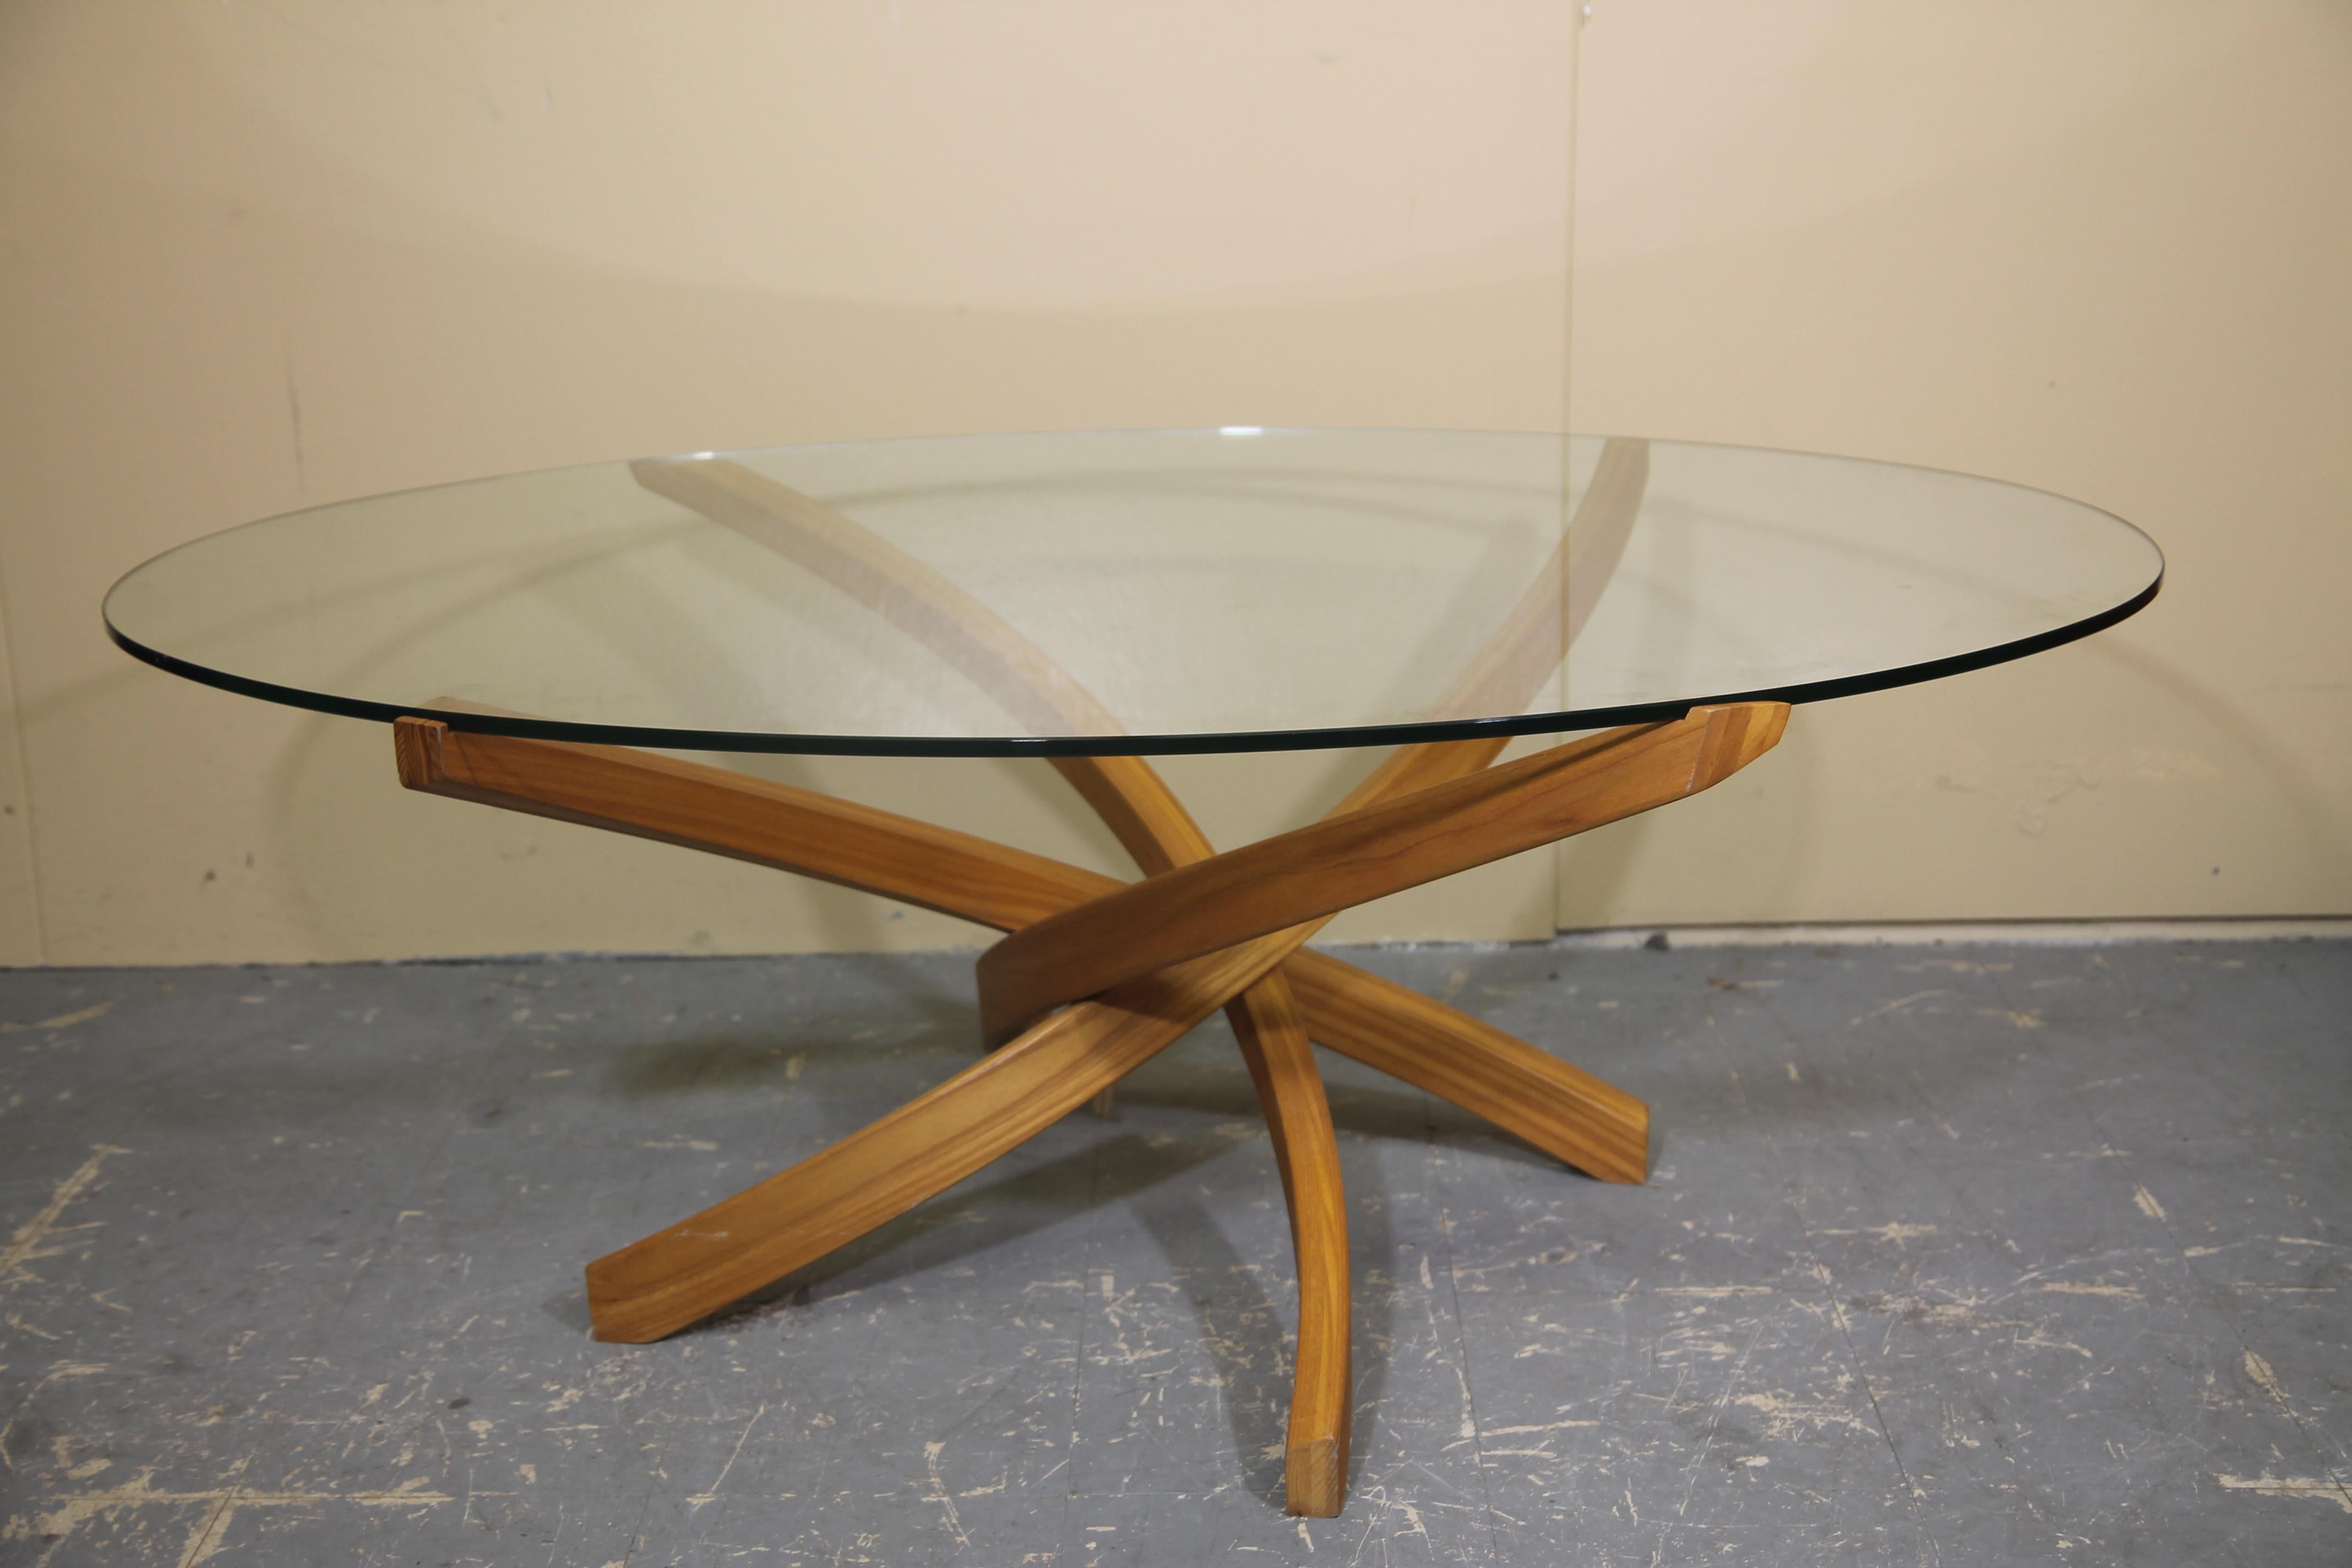 Amazing teak bentwood coffee table. Glass sits securely on top of the table in cut outs on each arm. I have never seen this example before. Well made and looks even better in person.